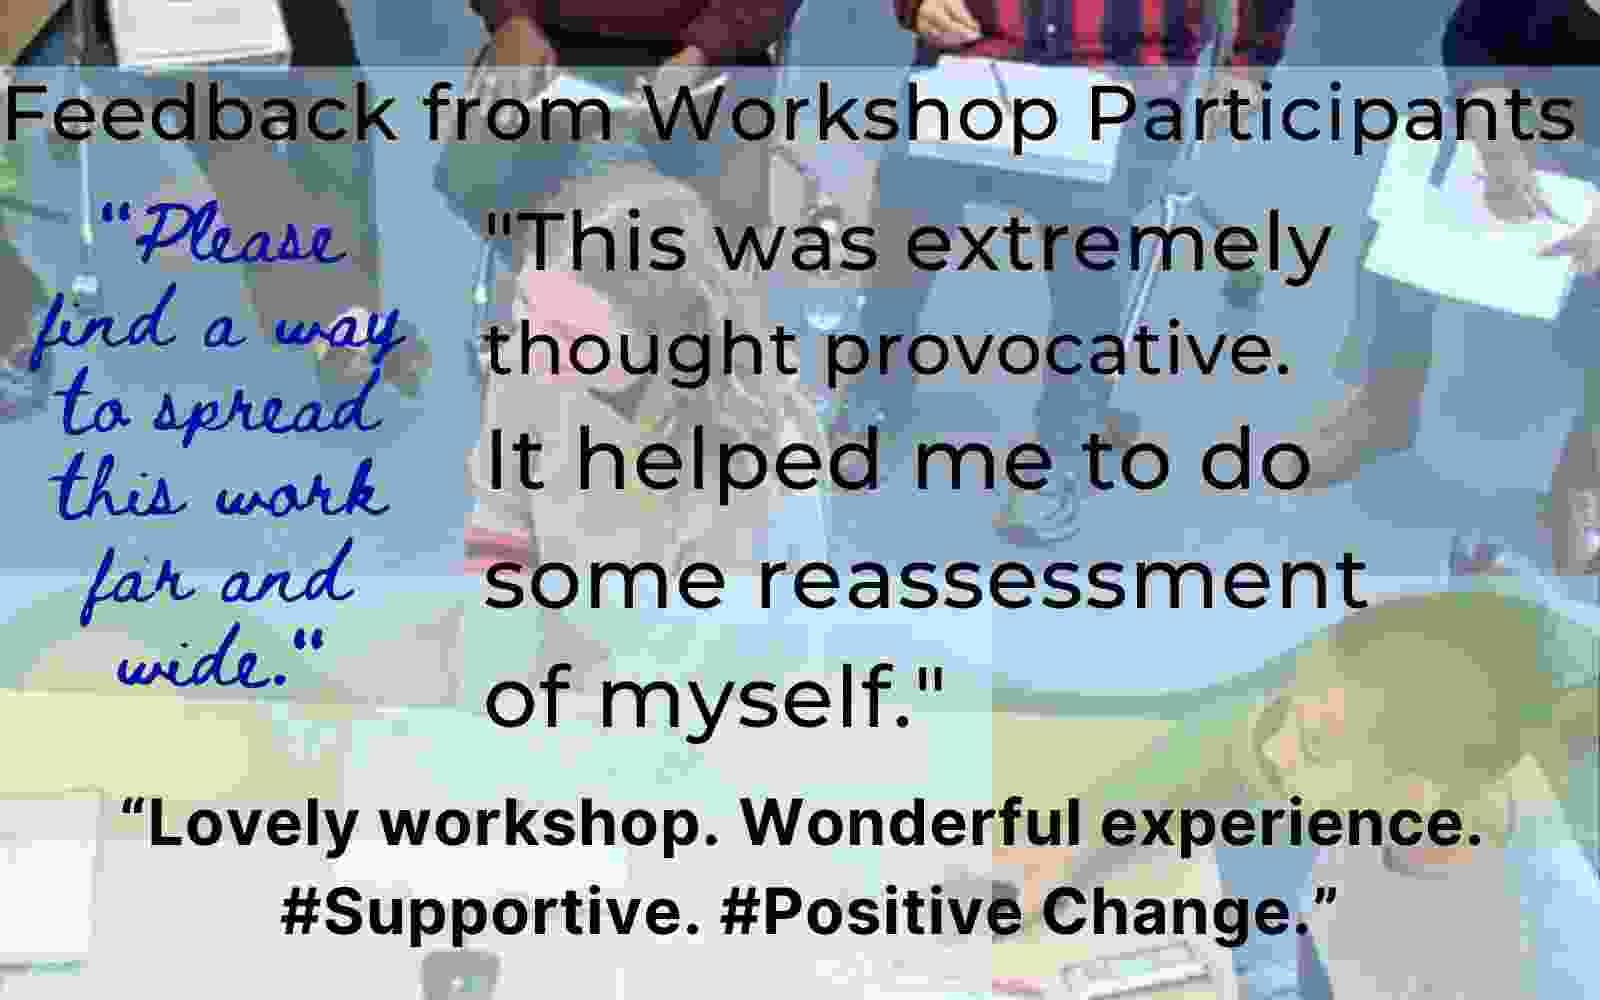 A participant wrote, "This was extremely thought provocative. It helped me to do some reassessment of myself."  Another participant wrote, "“Please find a way to spread this work far and wide." The same positive experience was echoed by another participant who summed it up by saying, "“Lovely workshop. Wonderful experience. #Supportive. #Positive Change.” Overcome implicit bias.